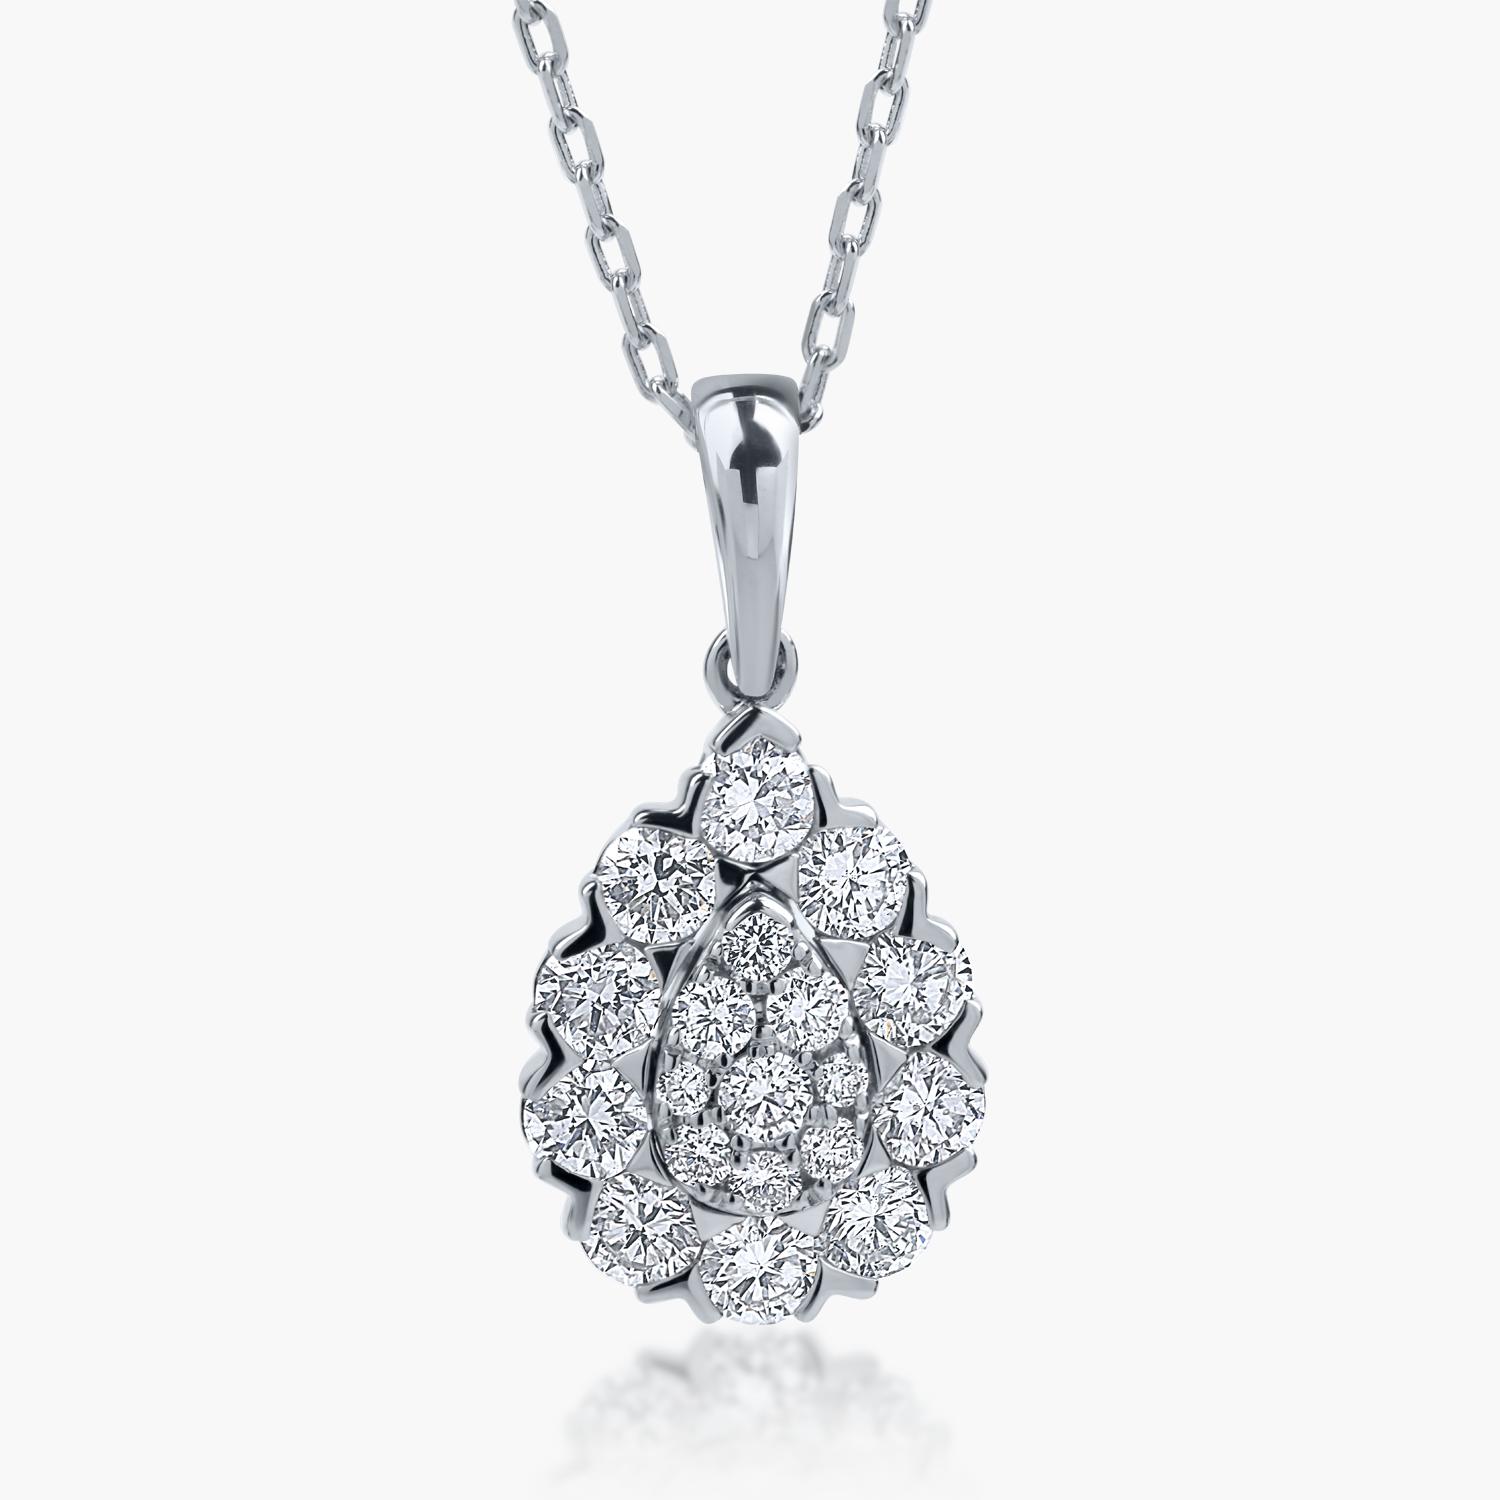 White gold pendant necklace with 0.8ct diamonds